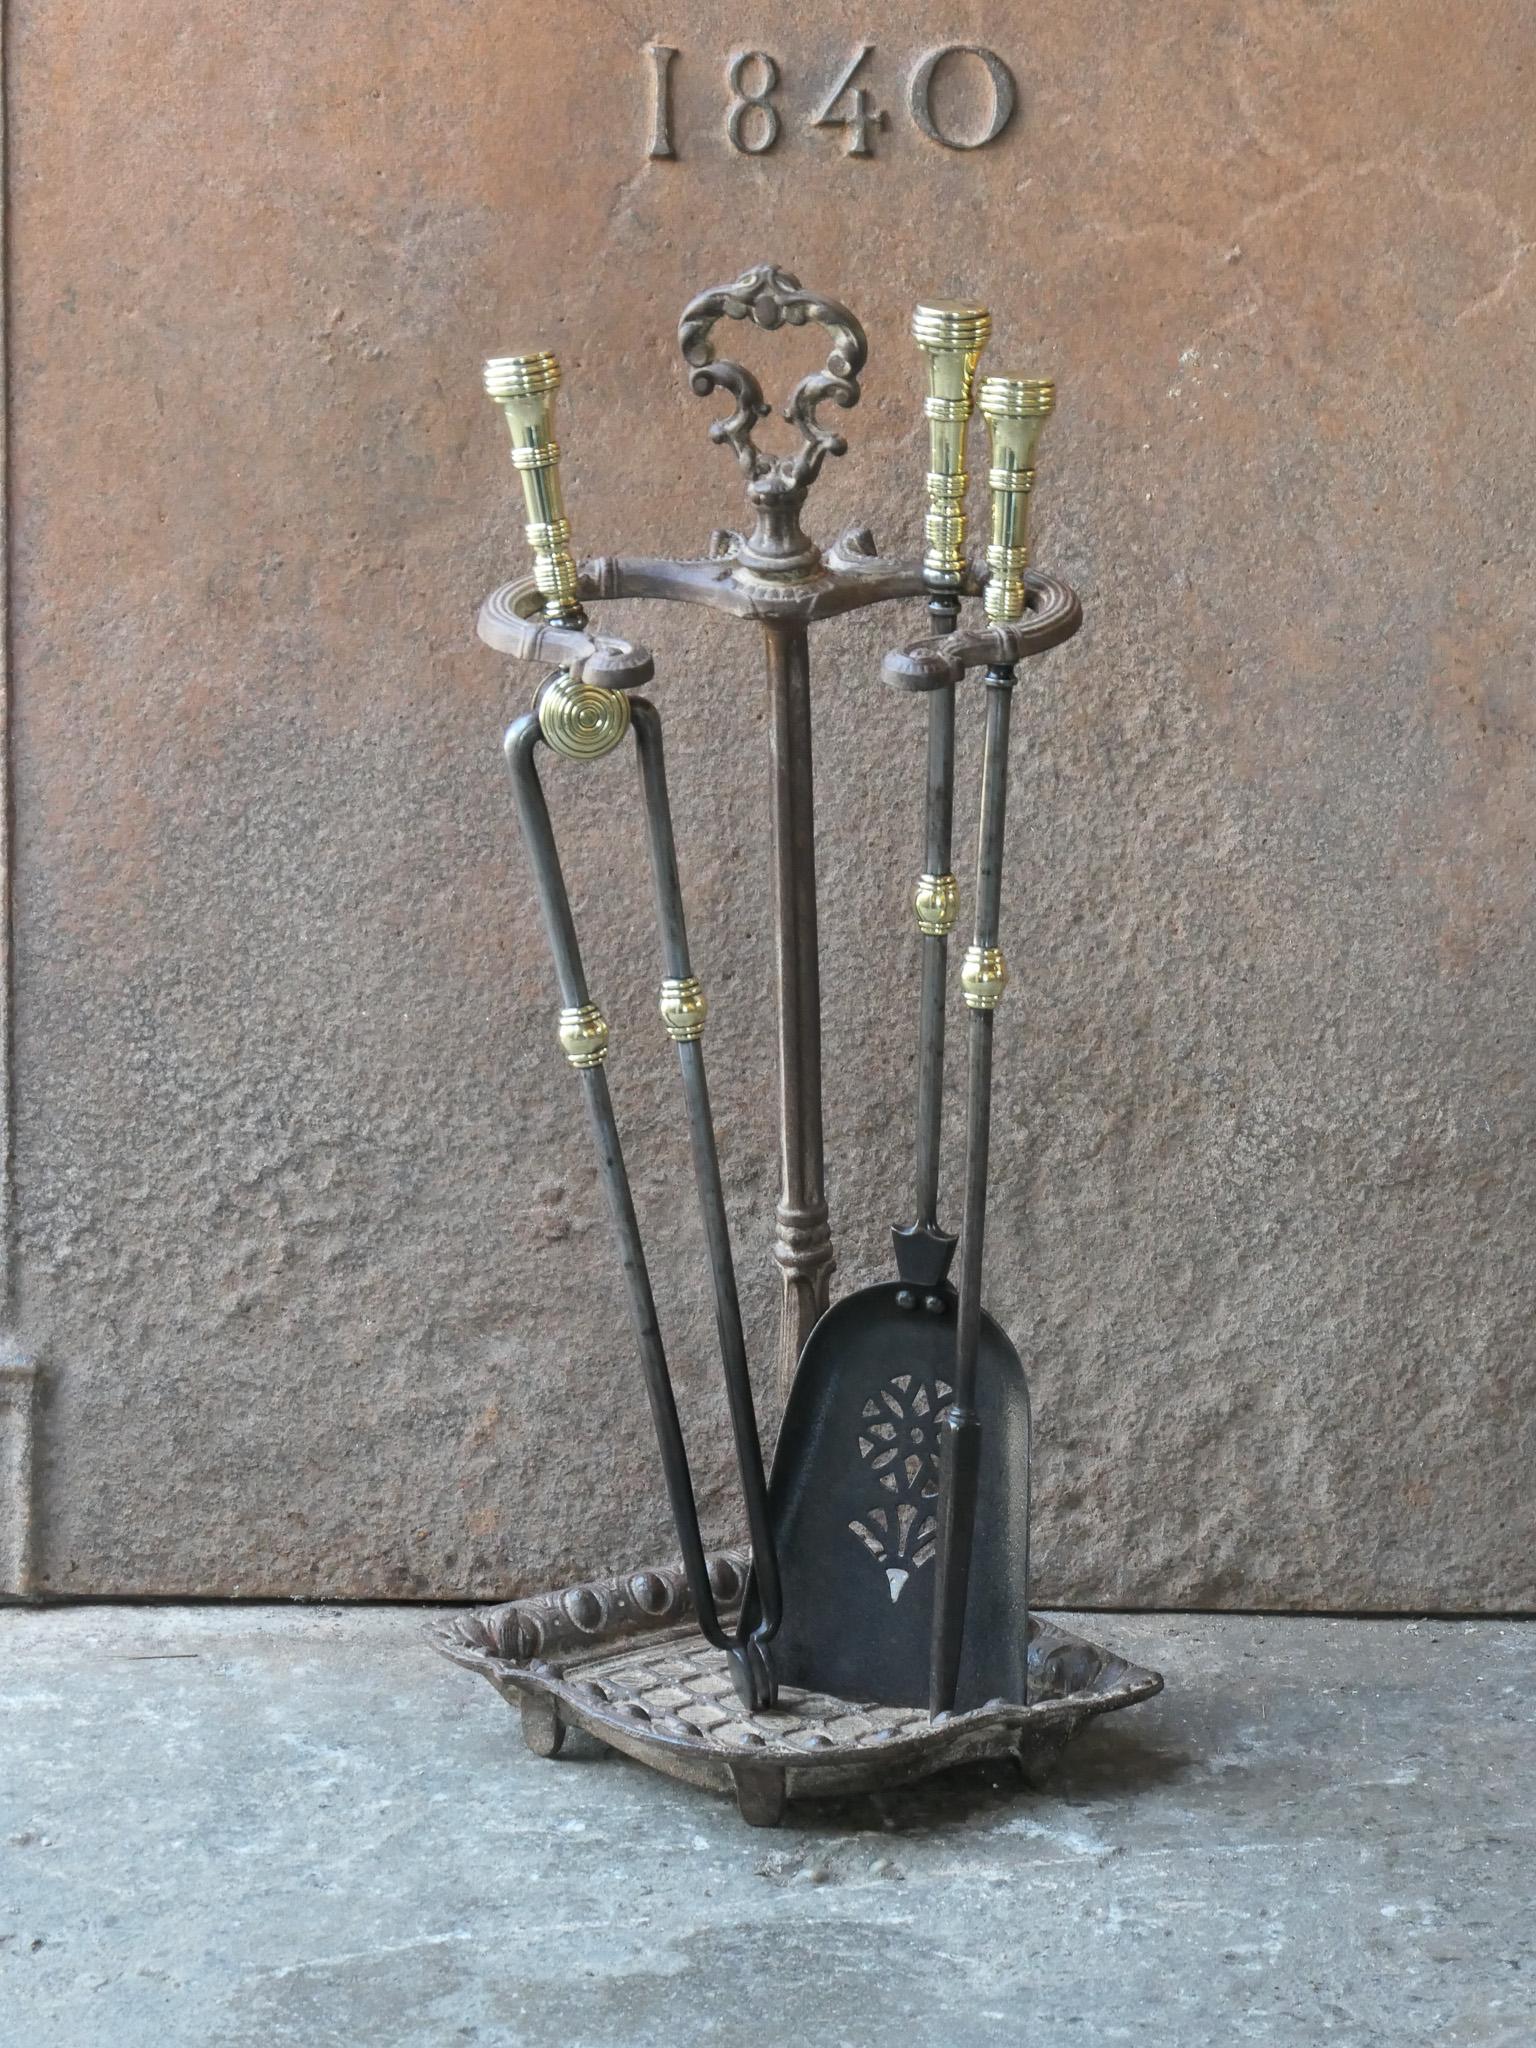 Small 19th century English Victorian period fireplace toolset. The tools are made of wrought iron with brass handles, while the stand is made of cast iron. The toolset consists of tongs, poker, shovel and stand. The condition is good.








.